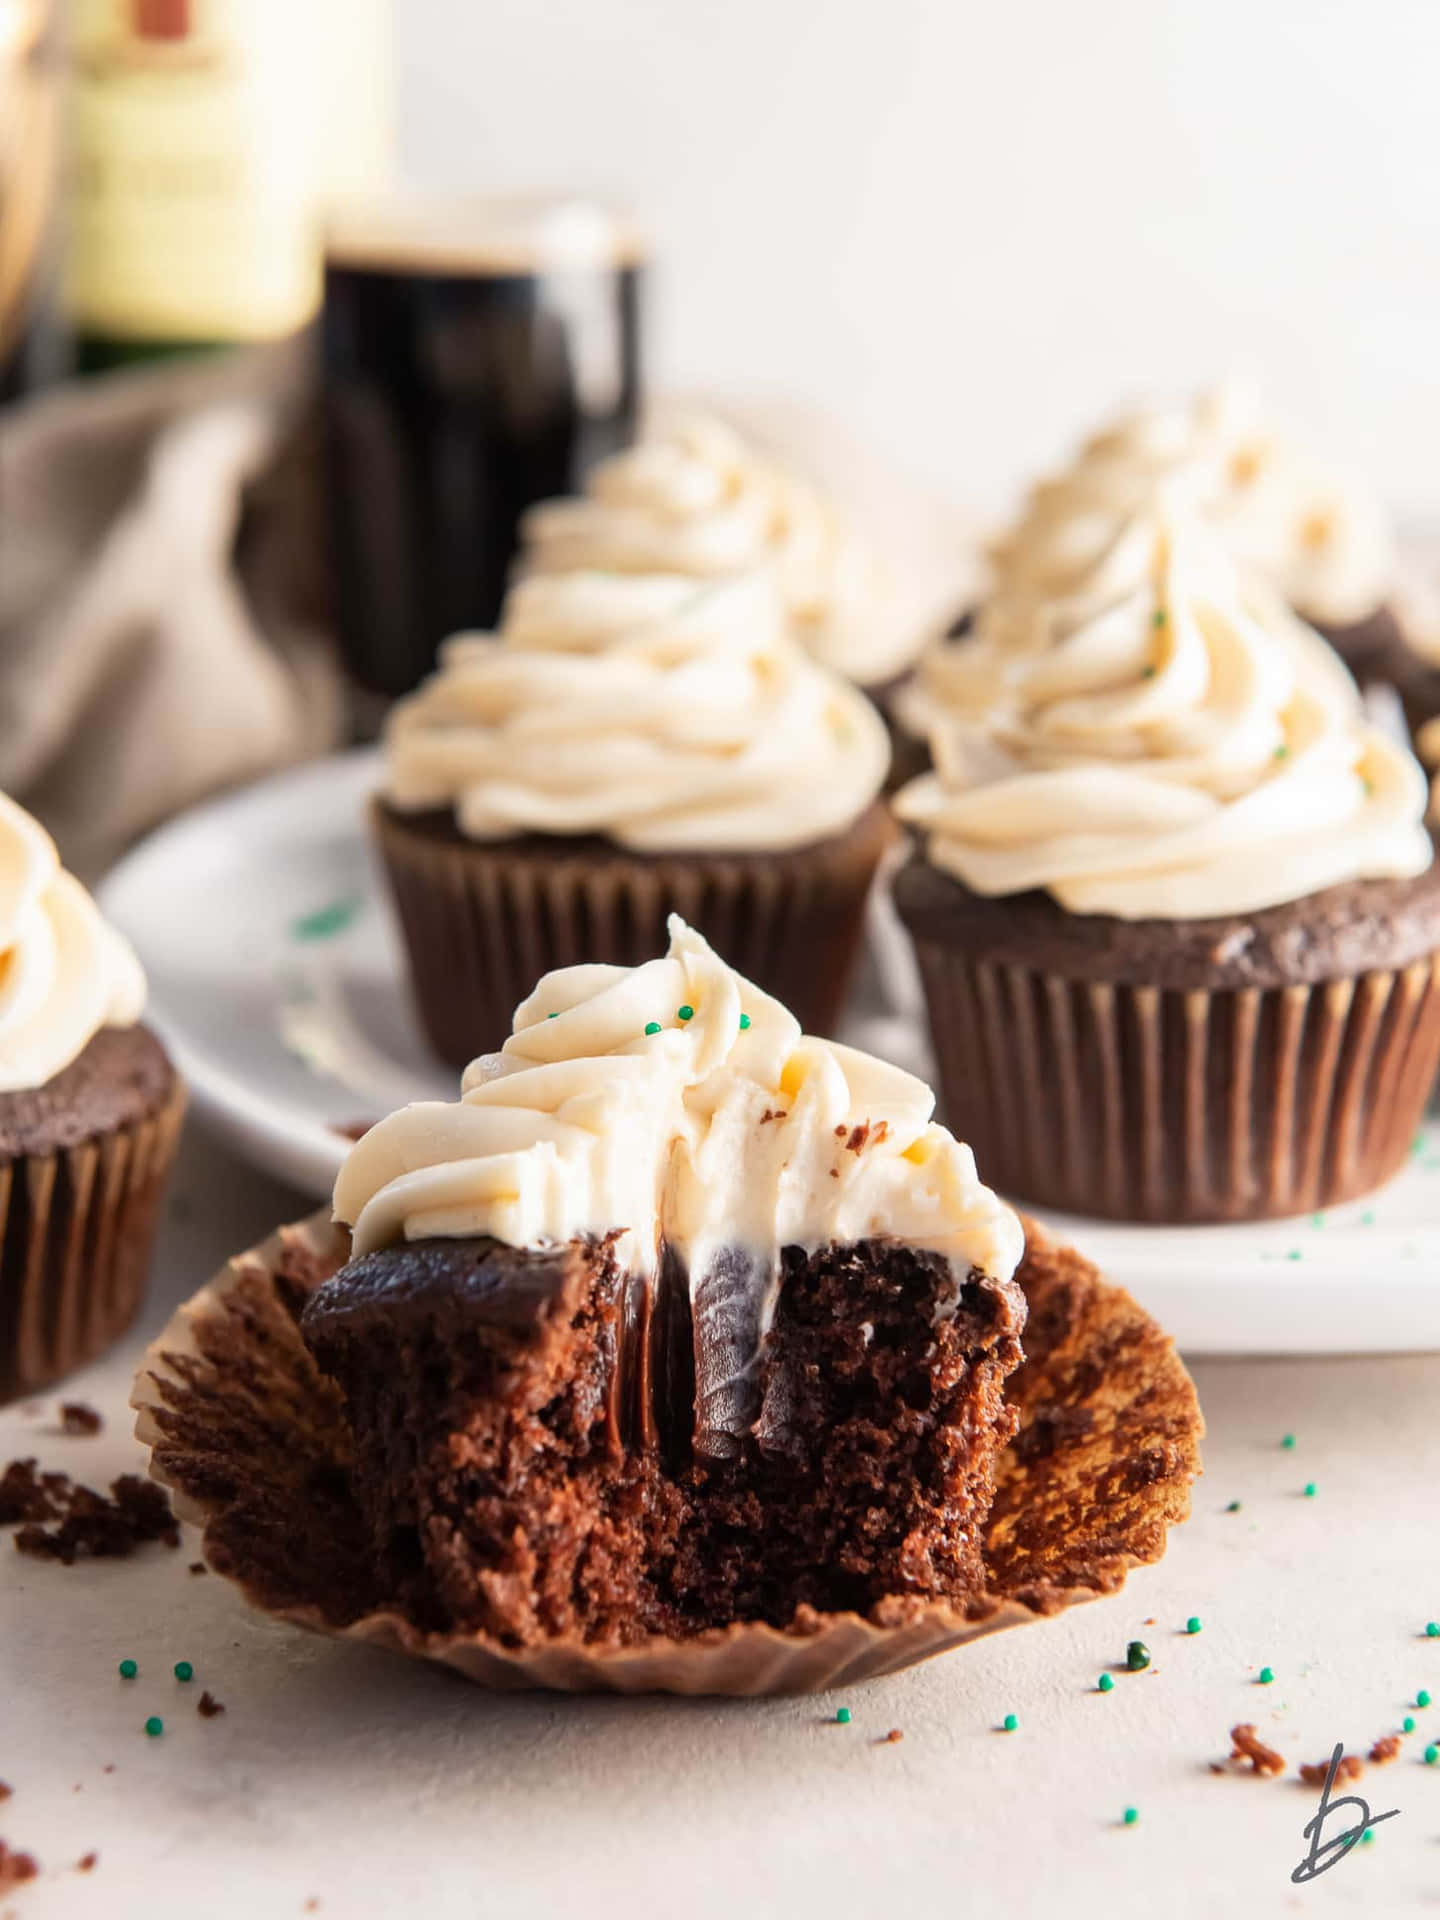 Irish Cream Cupcakes With A Bite Taken Out